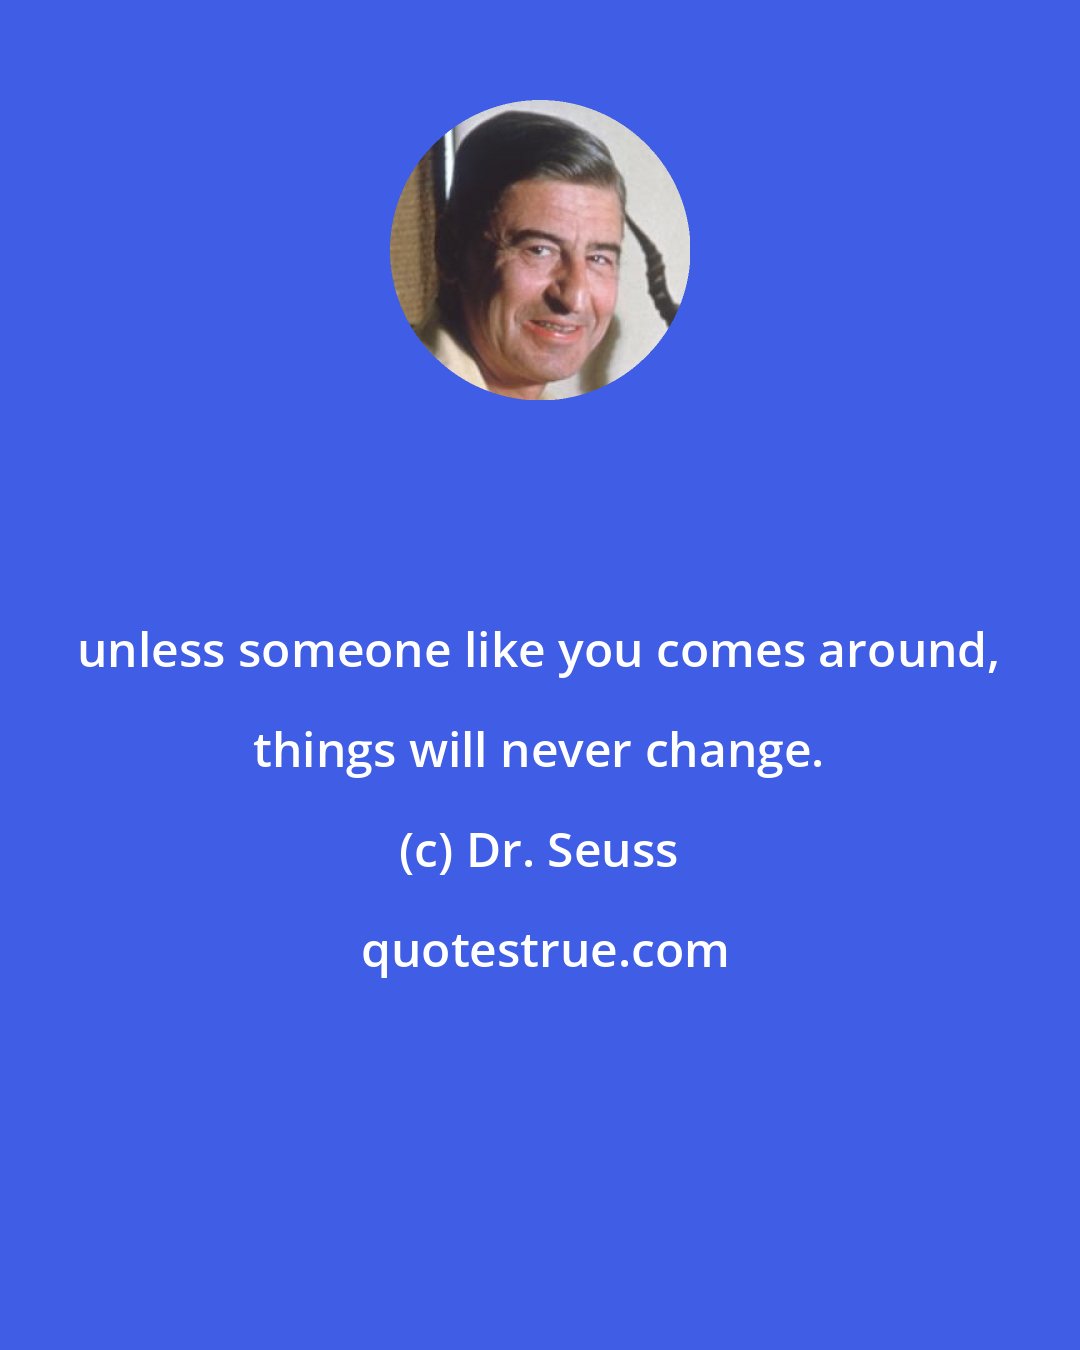 Dr. Seuss: unless someone like you comes around, things will never change.